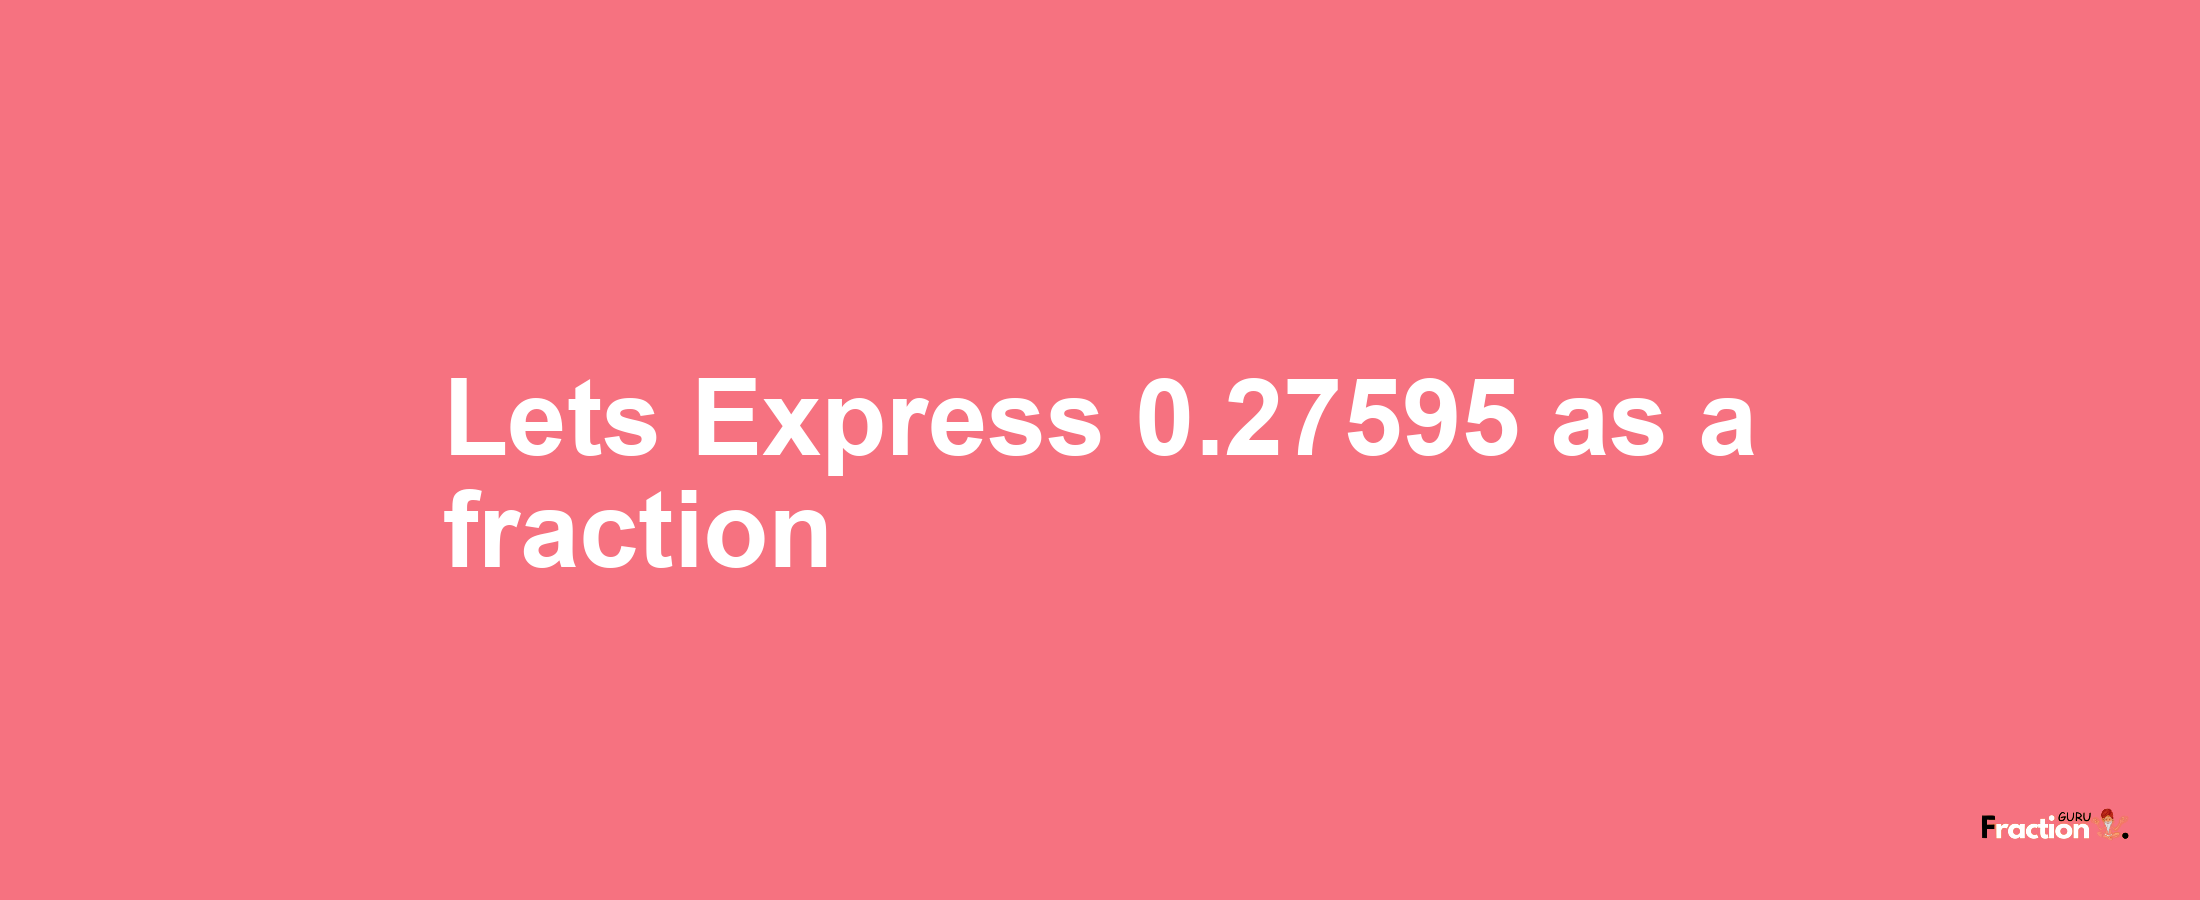 Lets Express 0.27595 as afraction